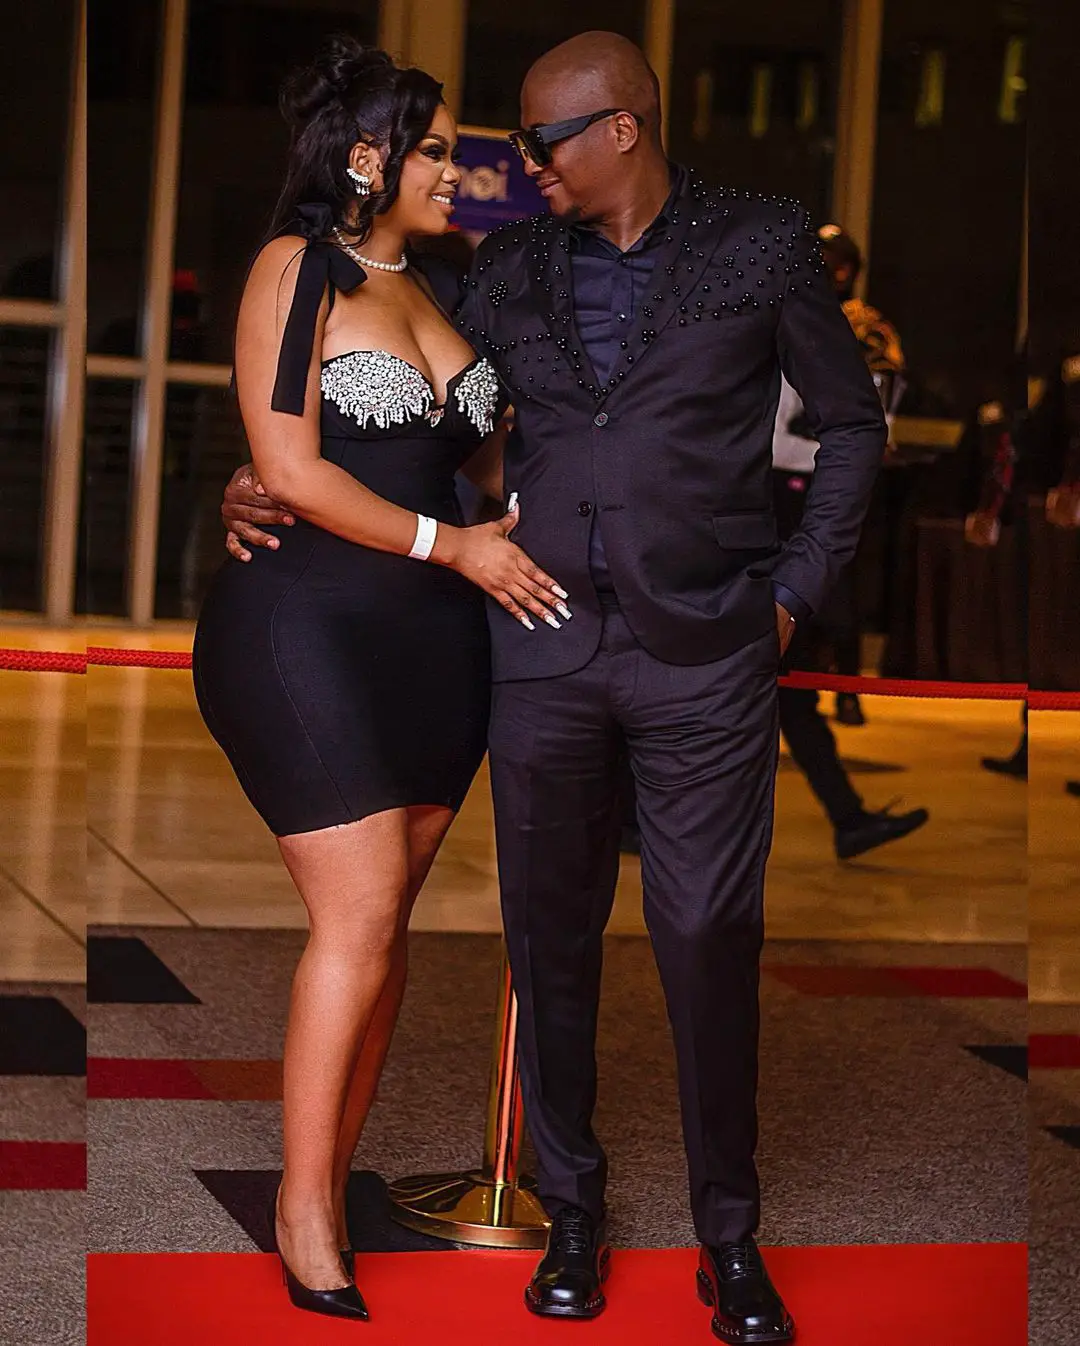 Pics – Londie London Shares Cute Photos Of Her New Man